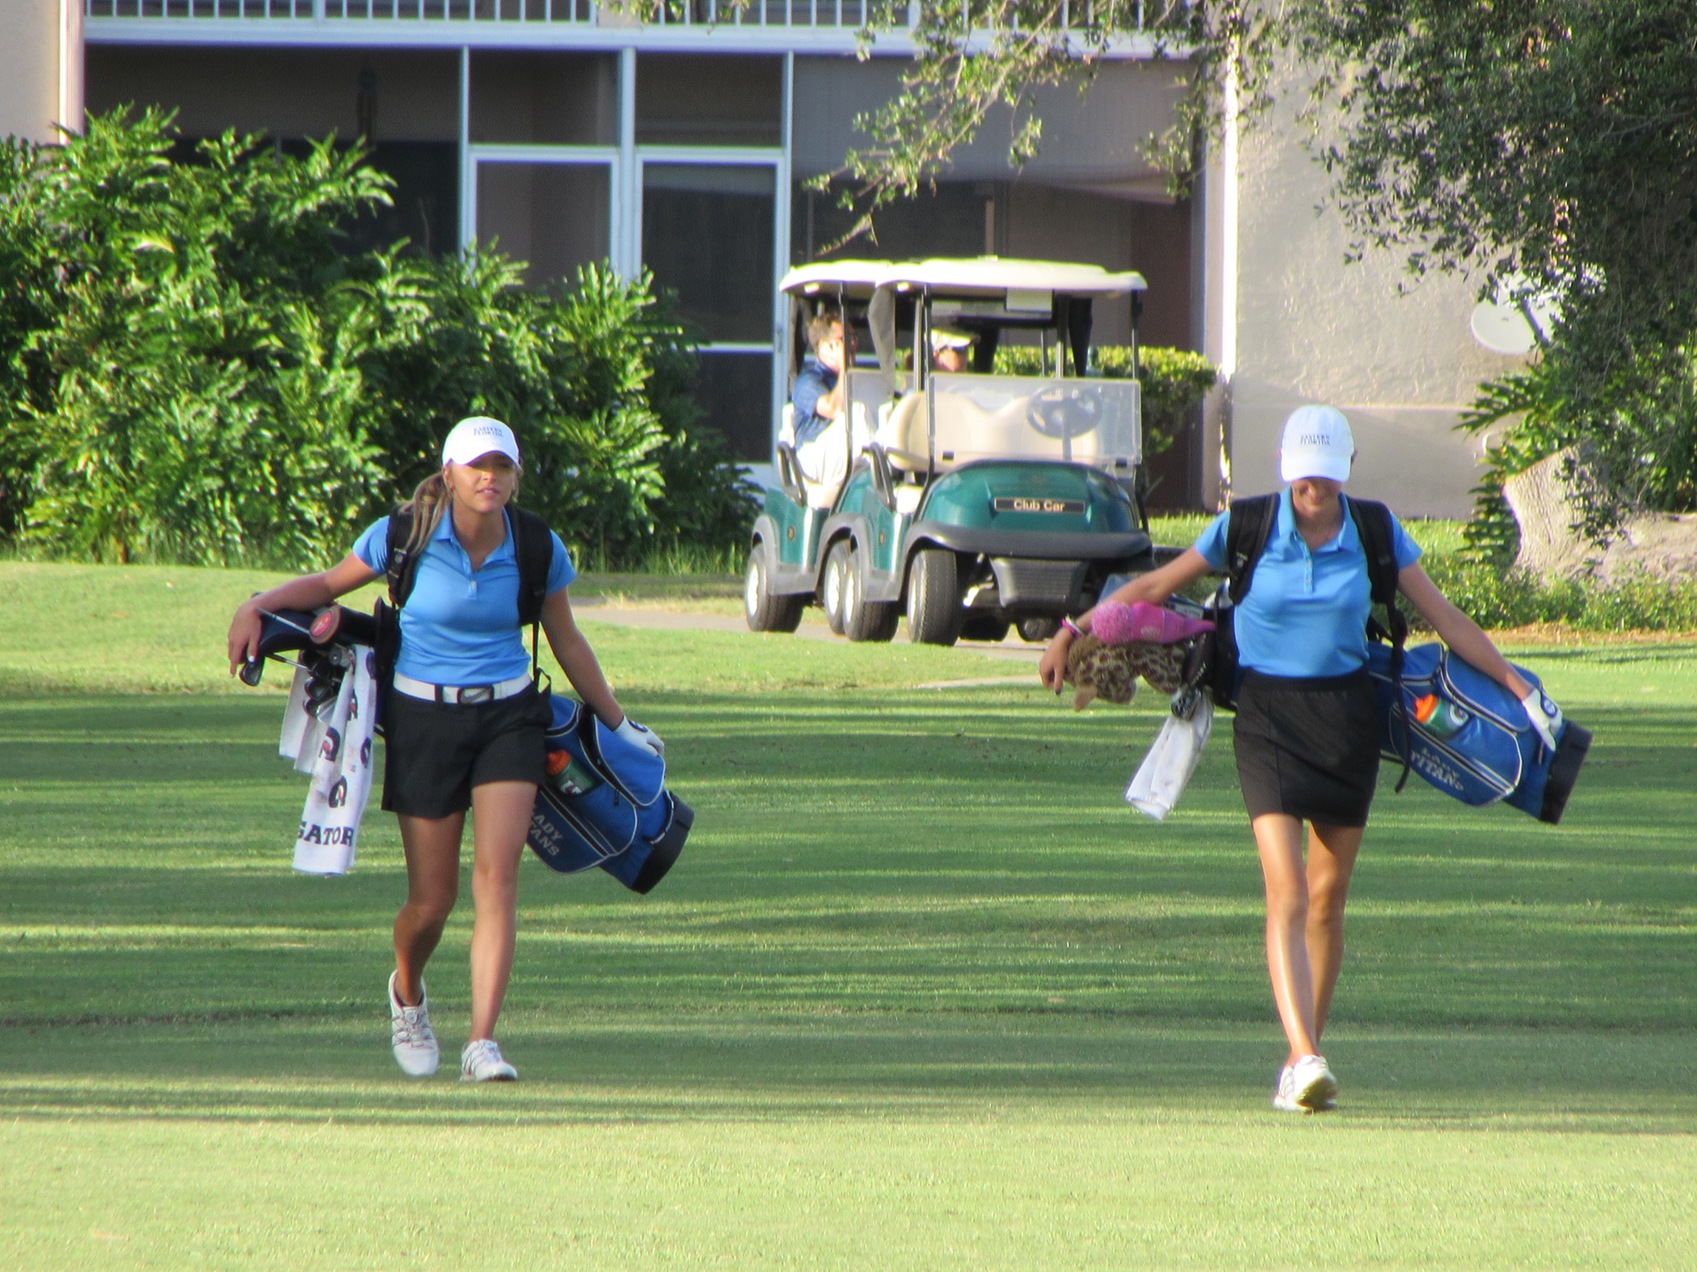 Women's golf team finishes strong at Embry Riddle event